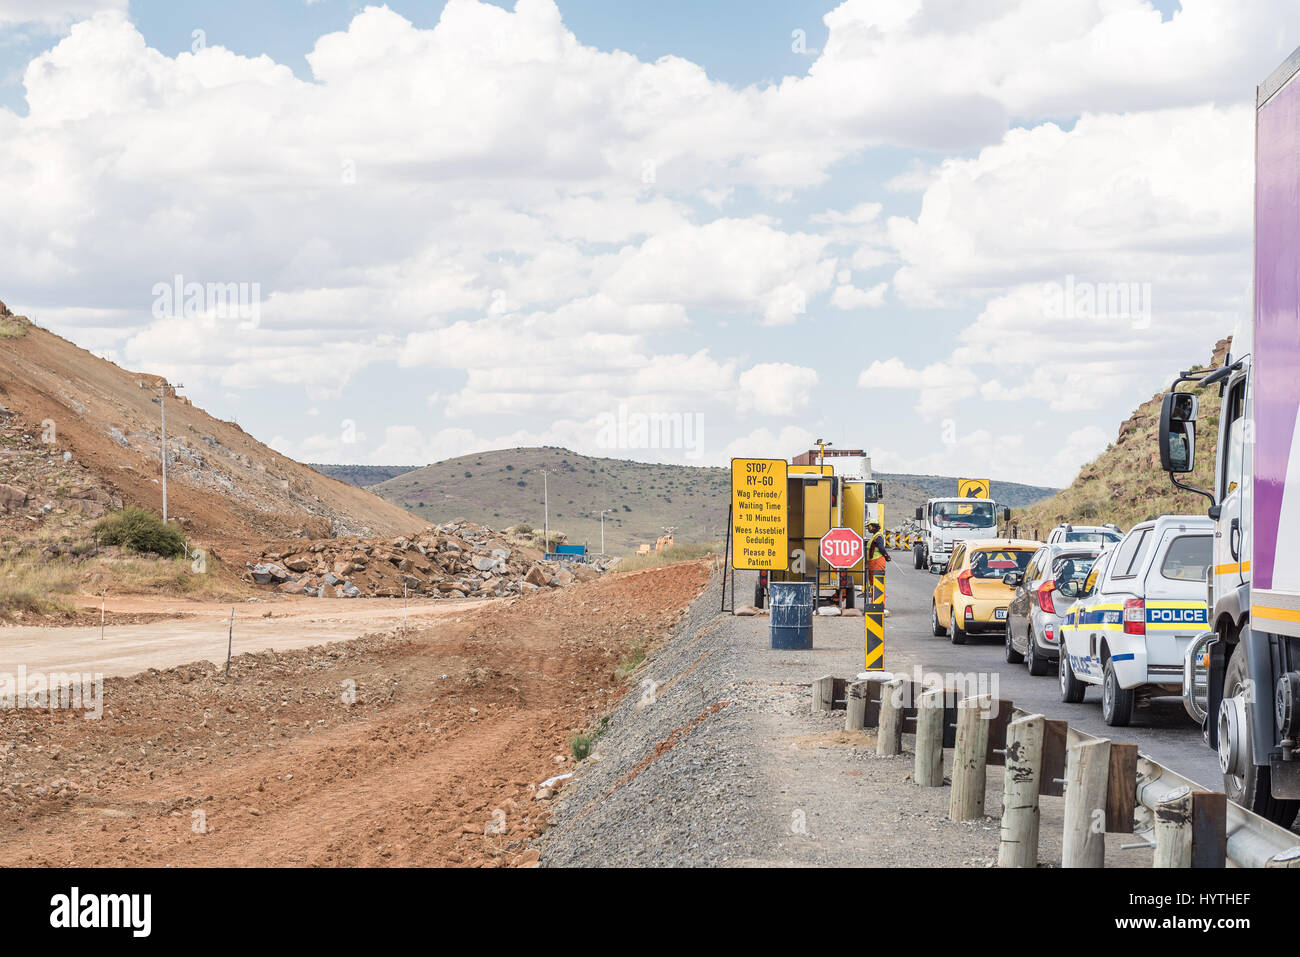 NOUPOORT, SOUTH AFRICA - MARCH 21, 2017: A traffic control point at roadworks on the N9 road between Noupoort and Middelburg Stock Photo